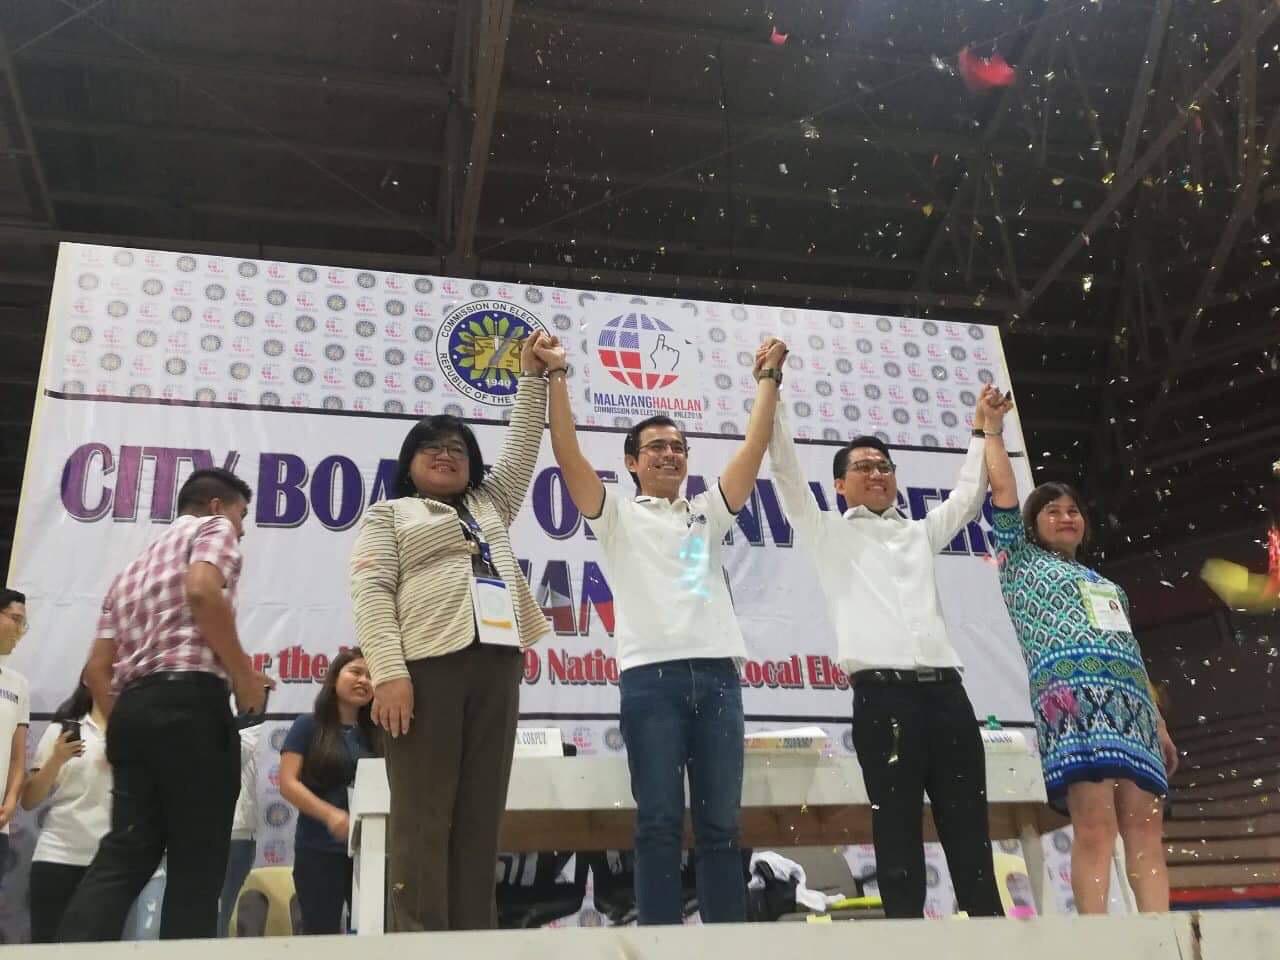 The City Board of Canvassers proclaims Francisco “Isko Moreno” Domagoso as the new mayor of Manila on Tuesday at the Manila San Andres Complex. Photo courtesy of Batang Maynila campaign team